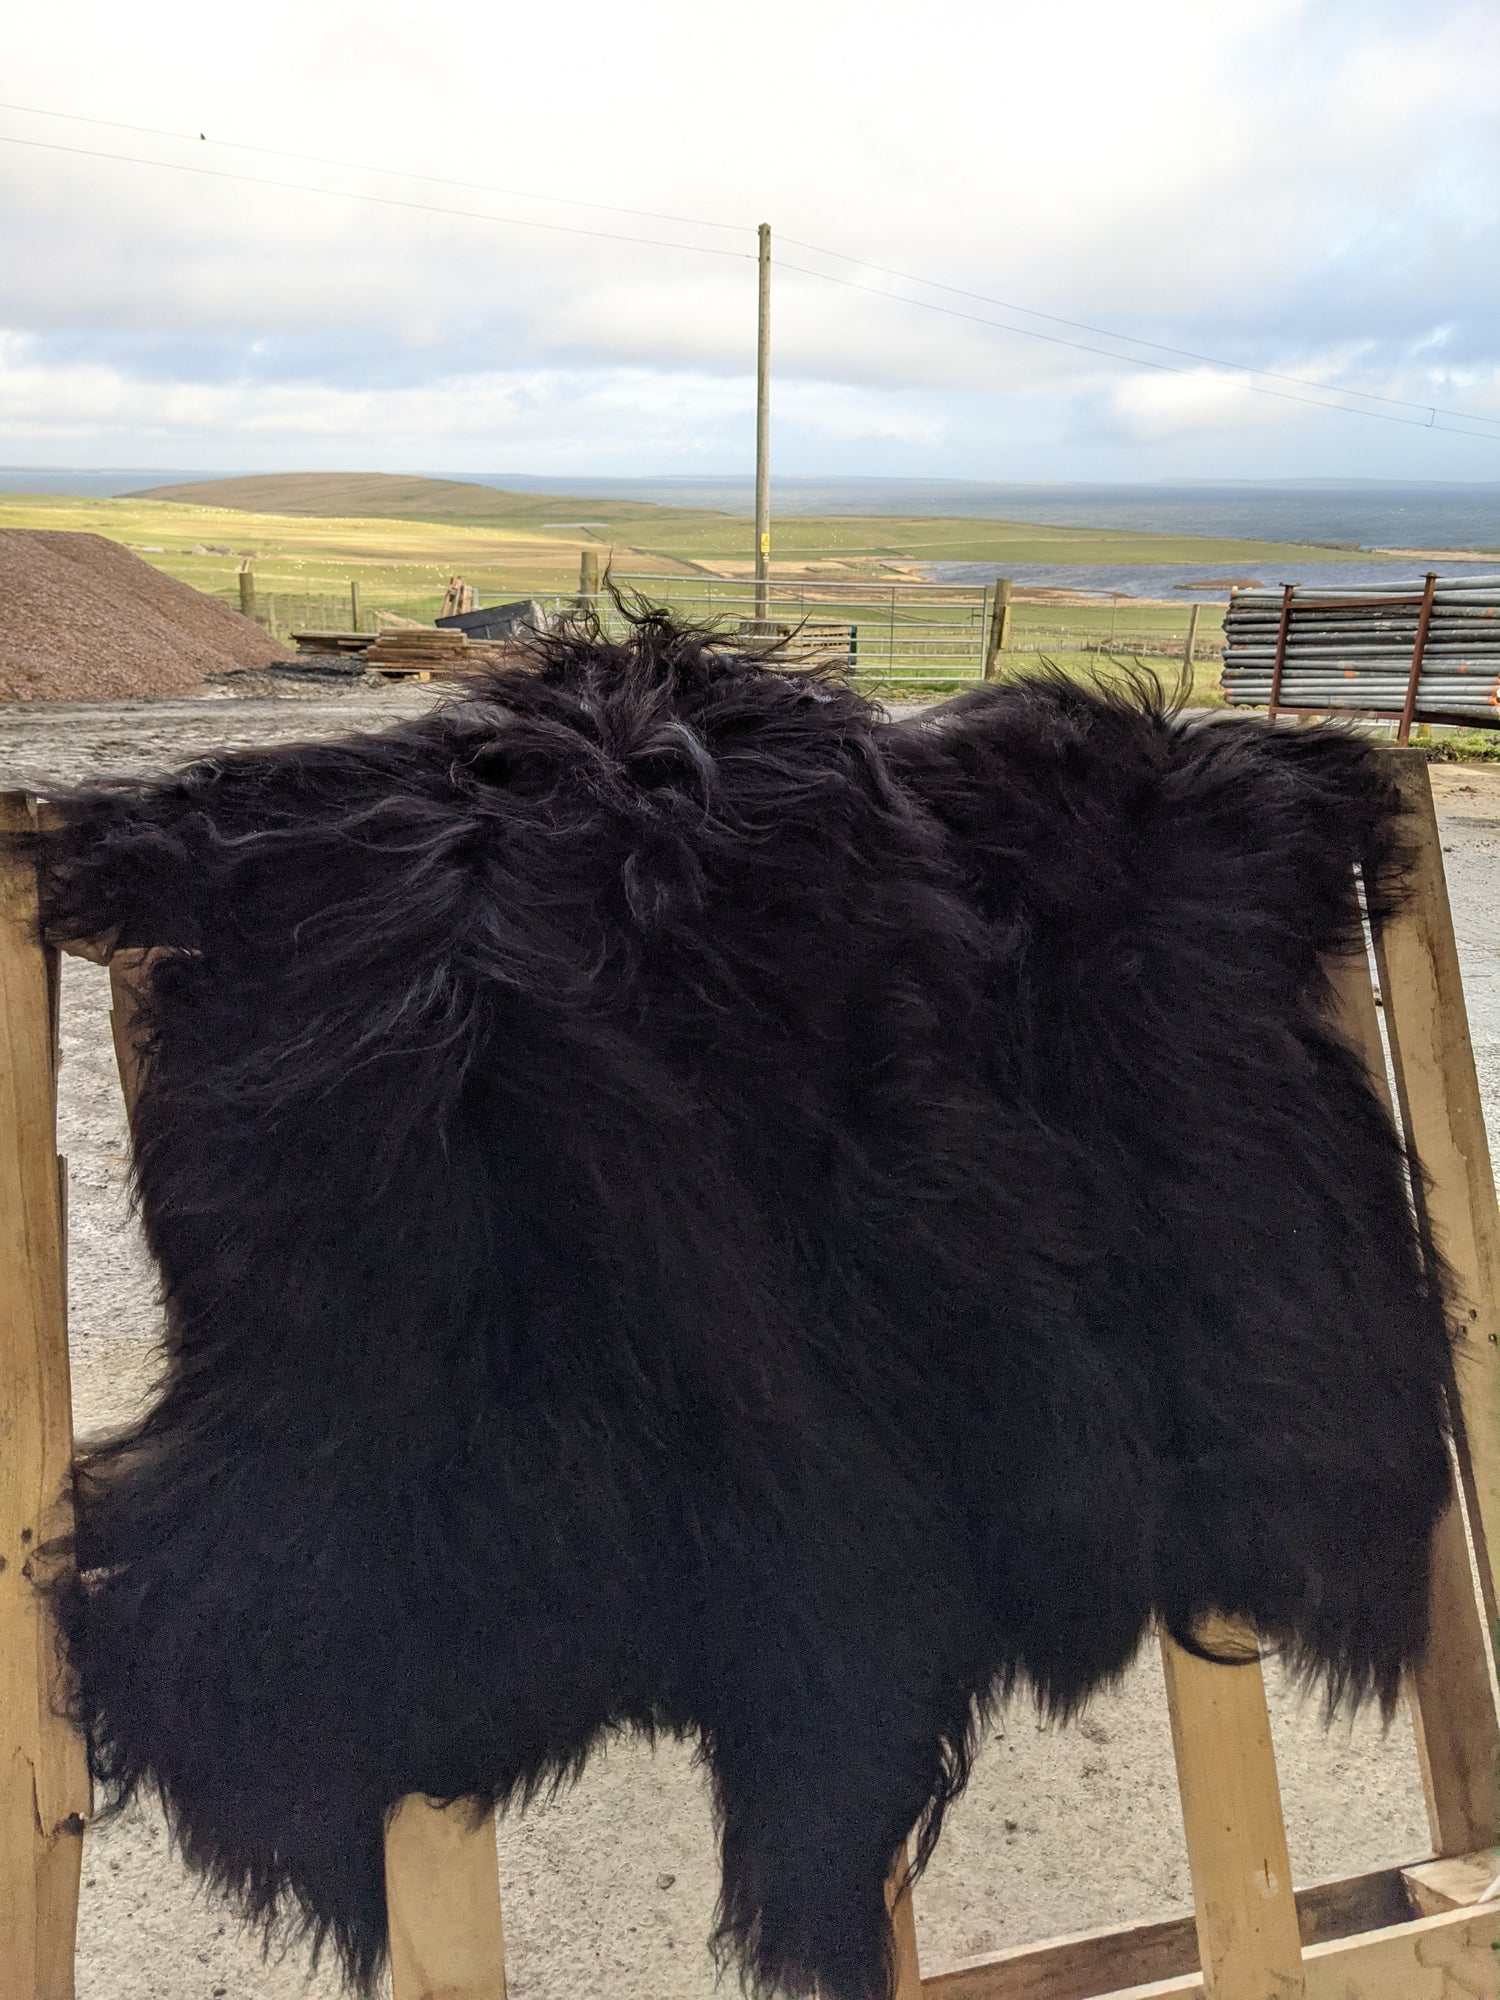 2 Black Lambskin Rugs side by side, with the farm in the background